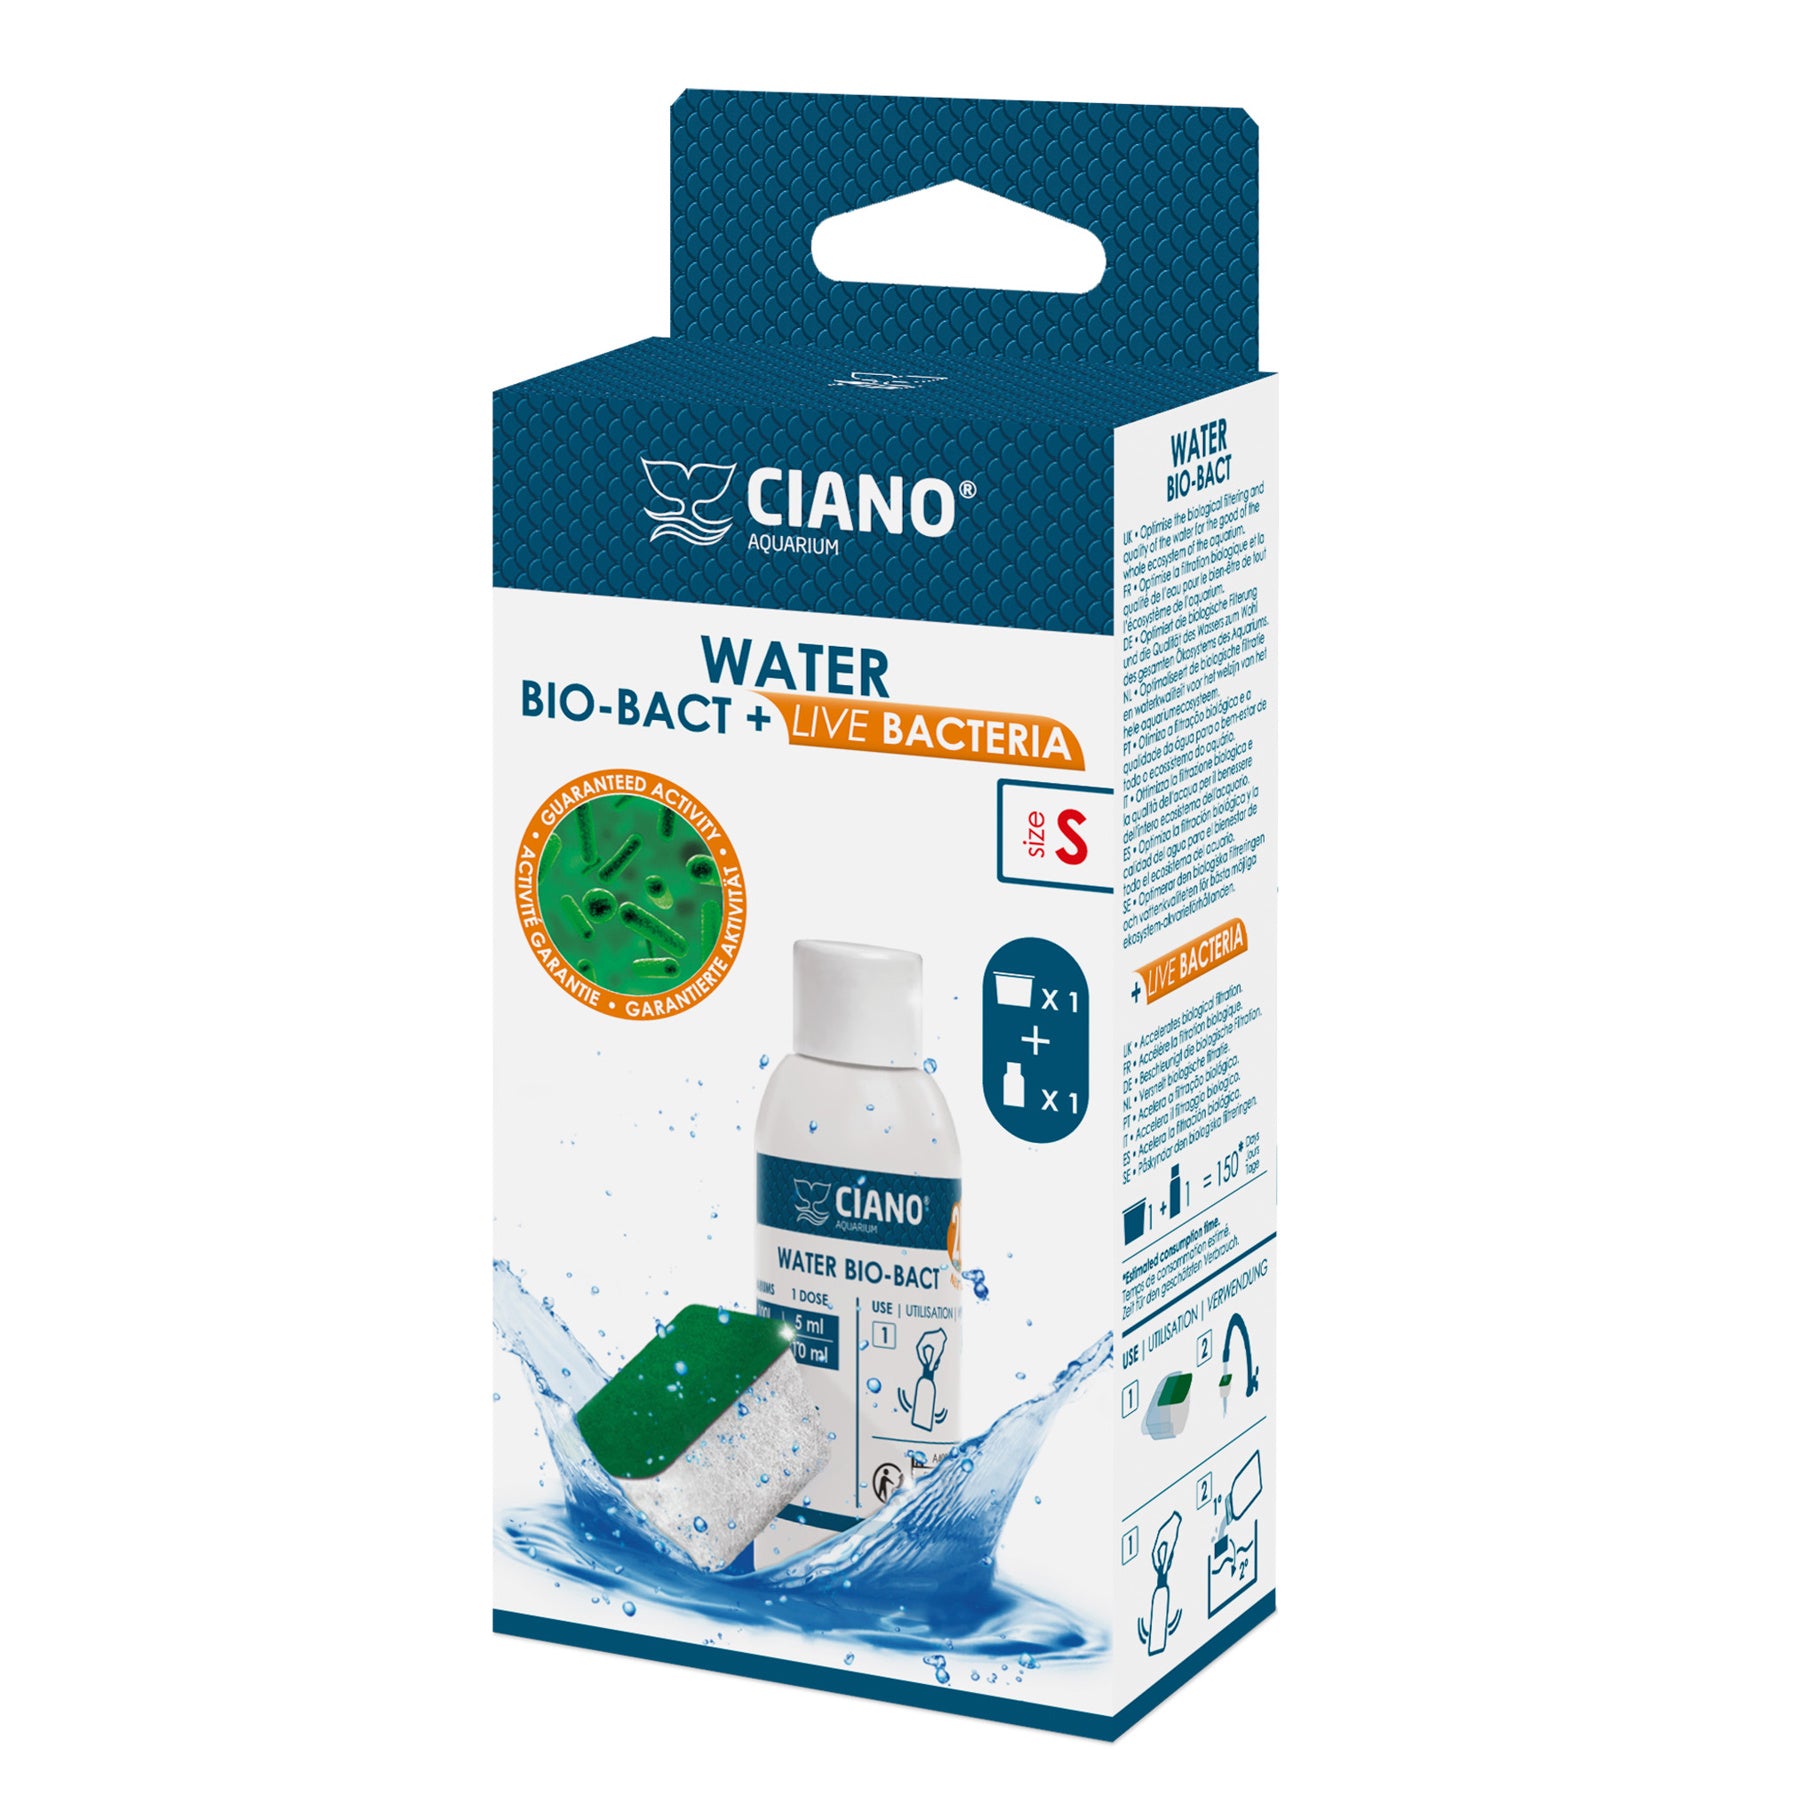 Ciano Water Clear & Protection 100ml